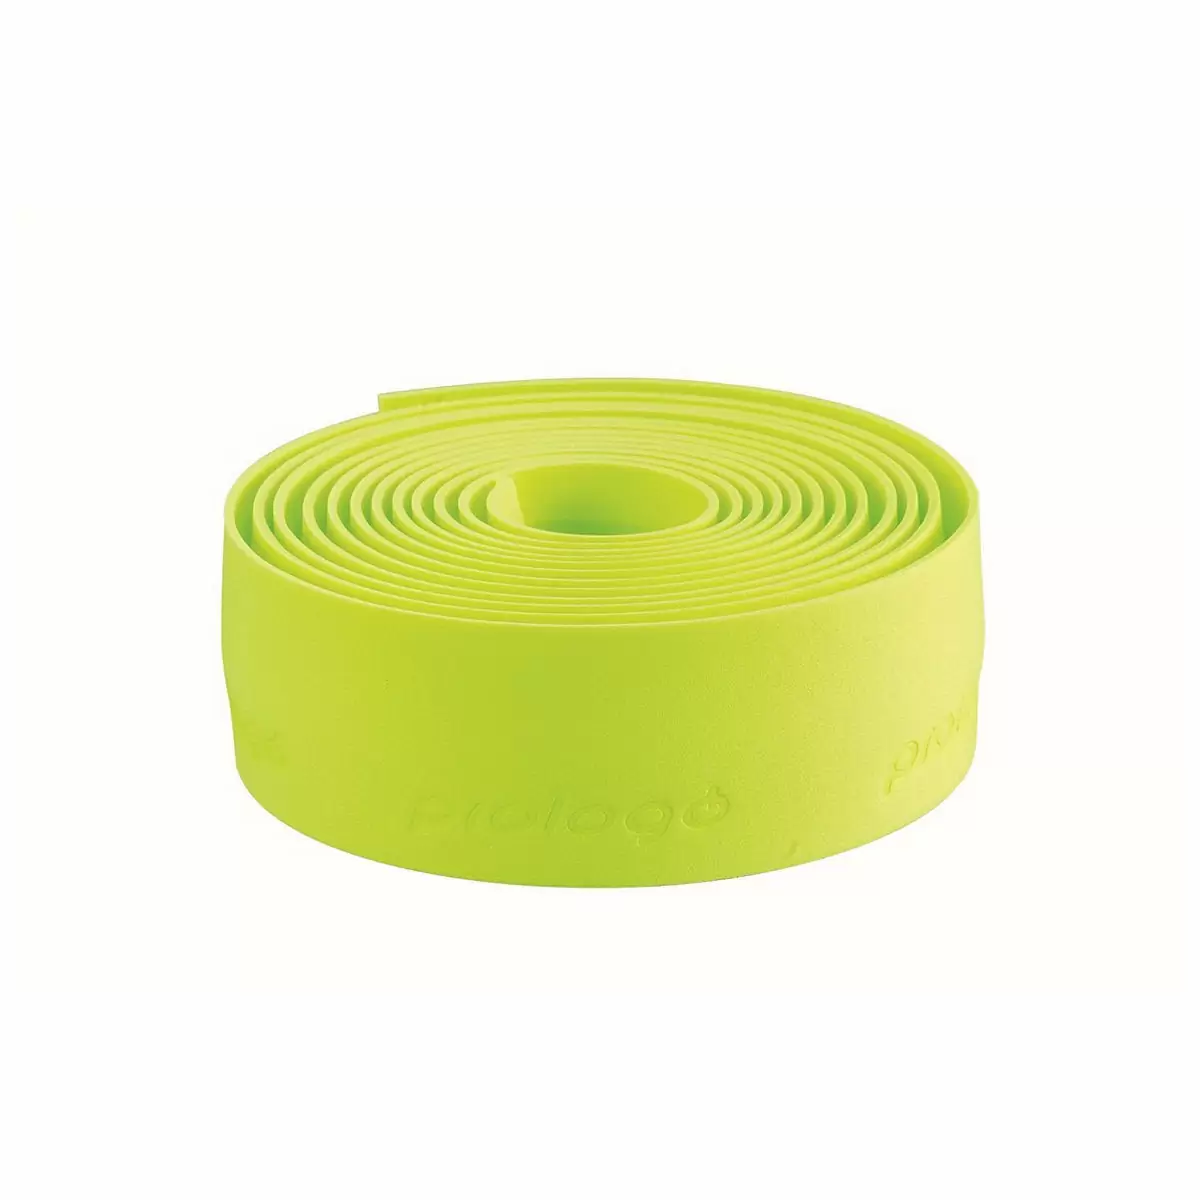 Handlebar tapes PLAINTOUCH yellow - image